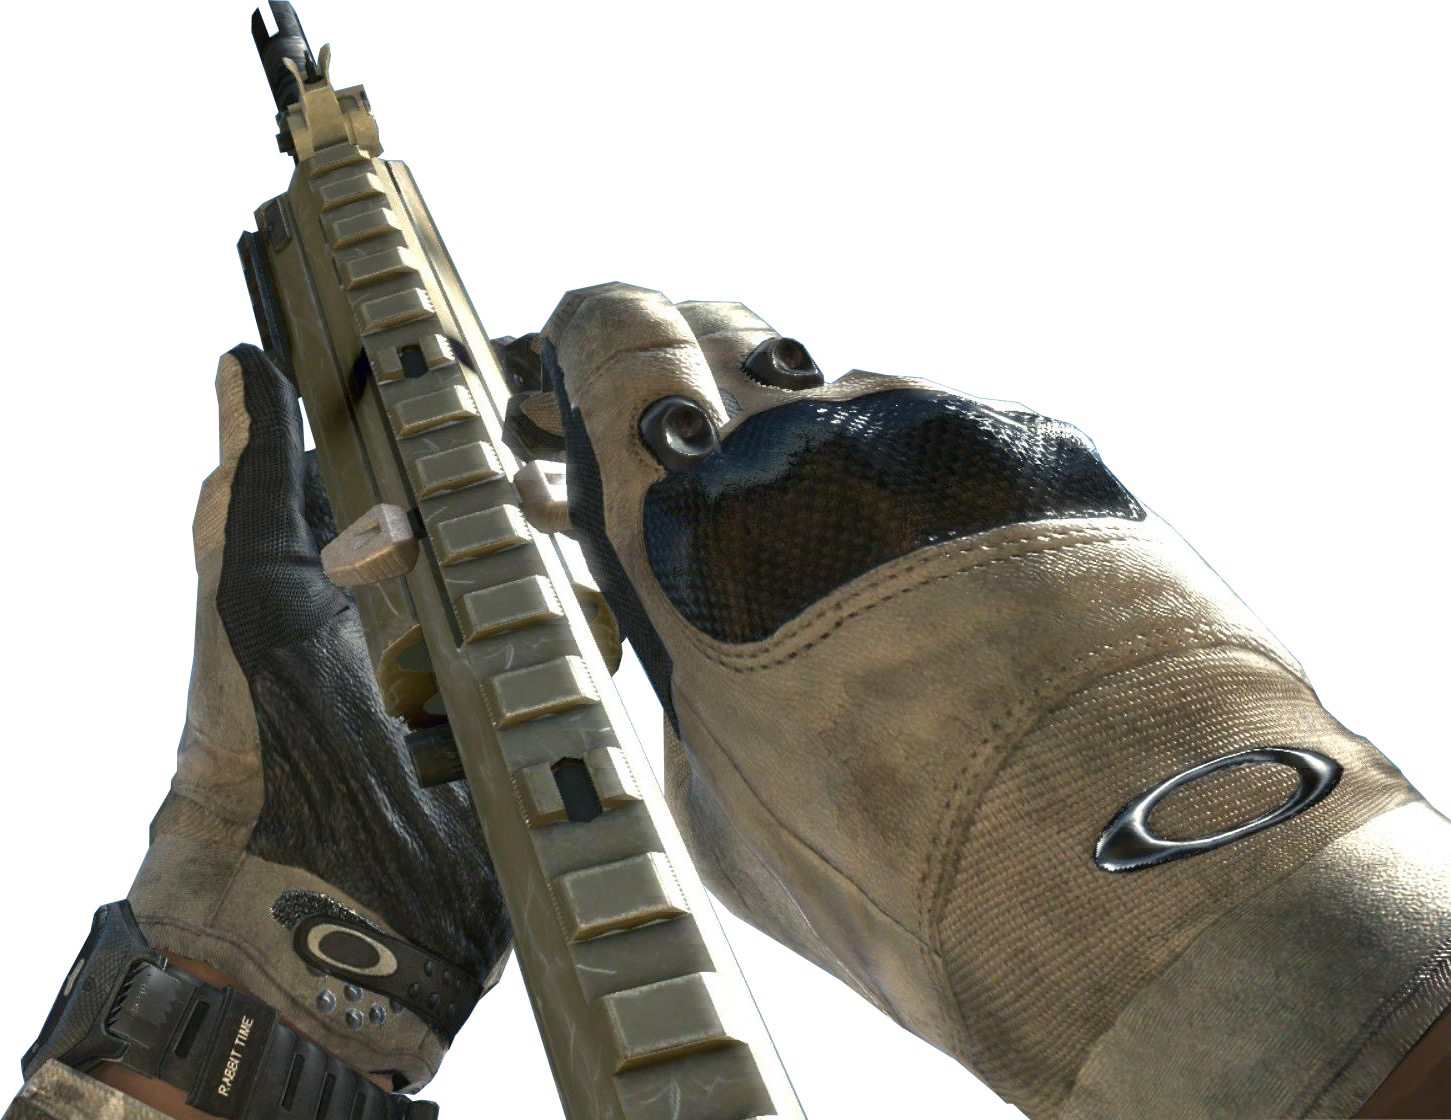 Download 8 Cocking Mw3 - Acr 6.8 Mw3 Png PNG Image with No Backgroud - PNGk...